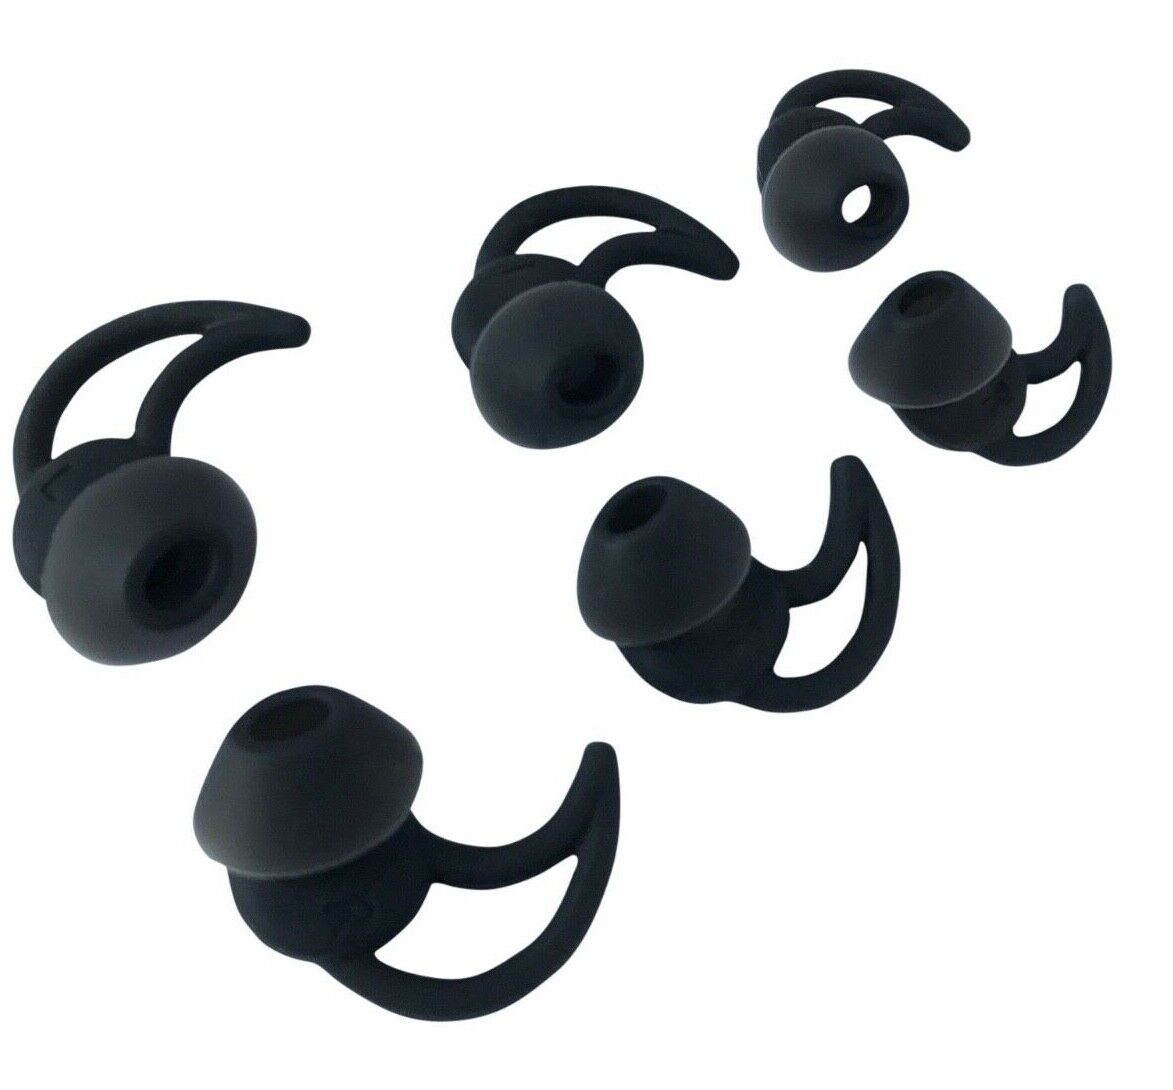 Replacement Silicone Ear Buds Tips For Bose Aviation Headset ProFlight 1 and 2